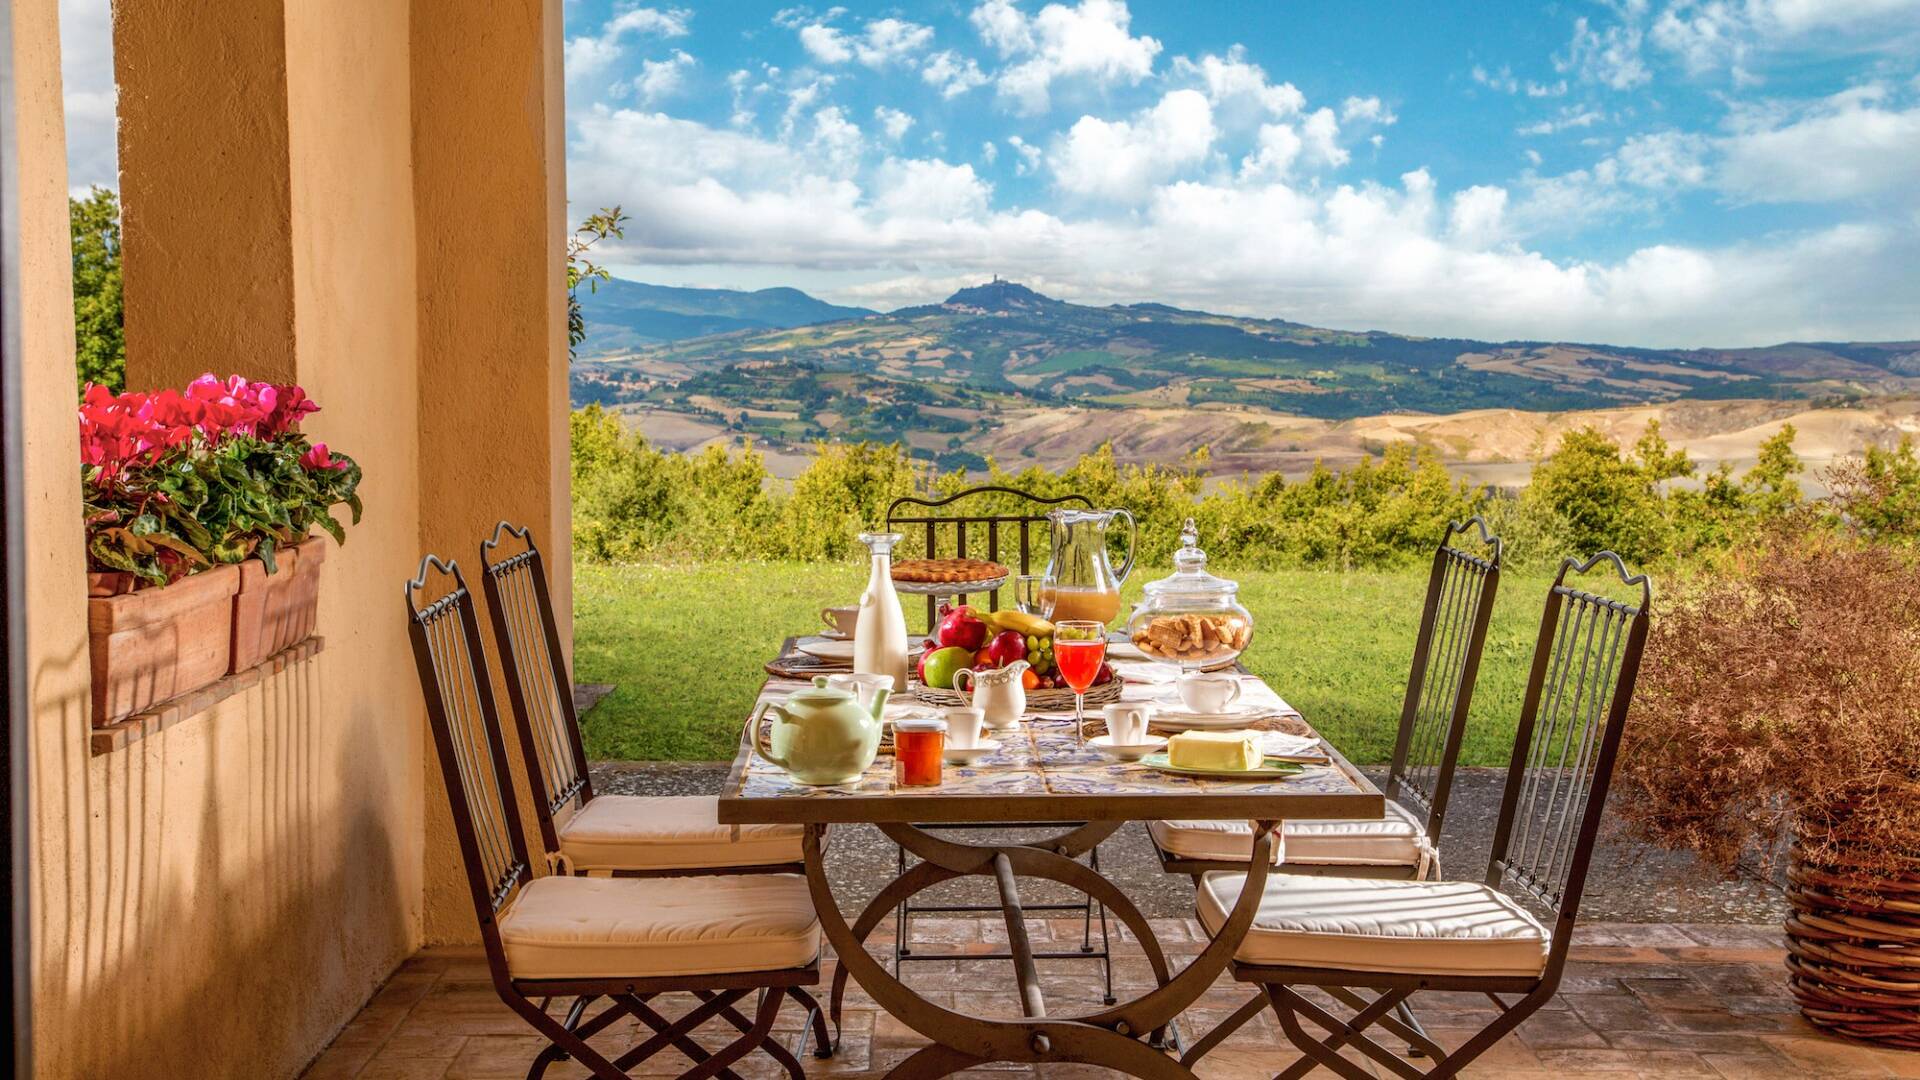 outdoor alfresco dining with view over the Tuscan hills